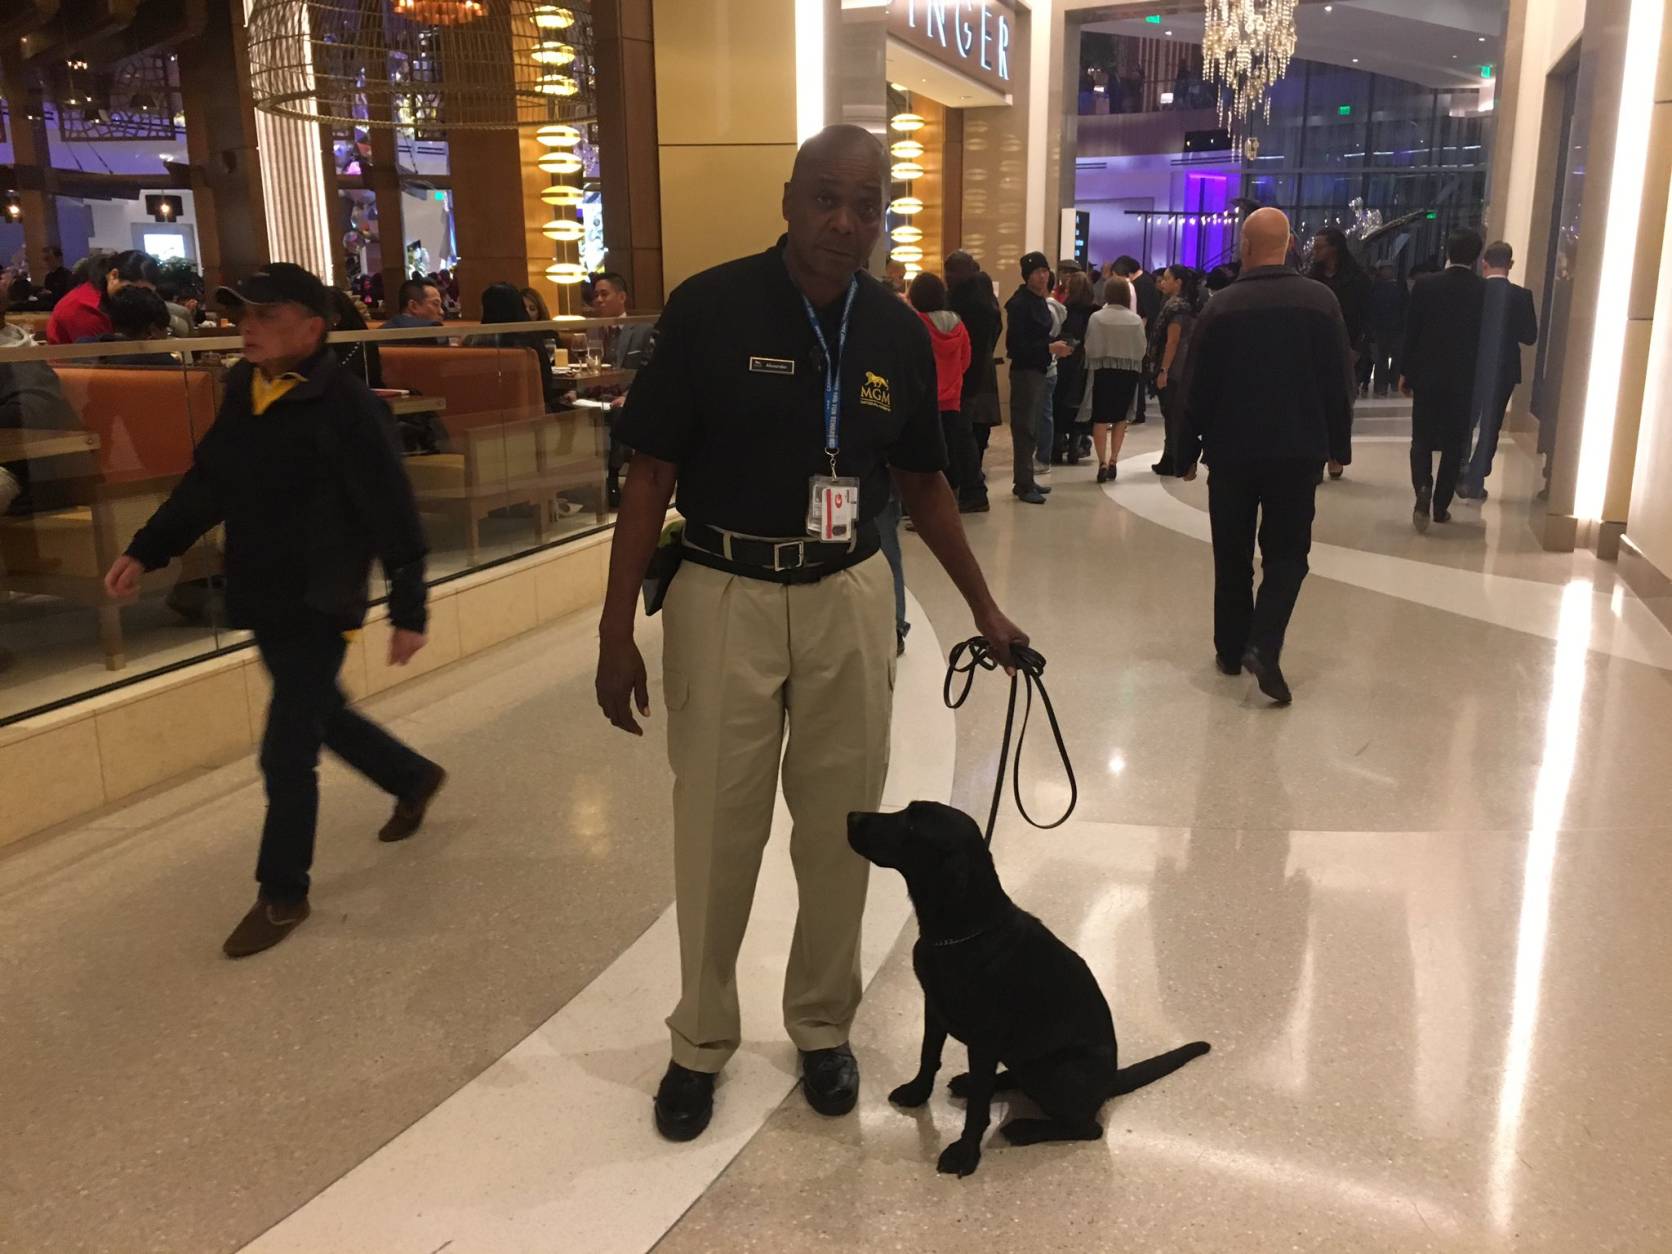 Security dog Kate kept things safe at the opening night of the MGM National Harbor. (WTOP/Mike Murillo)